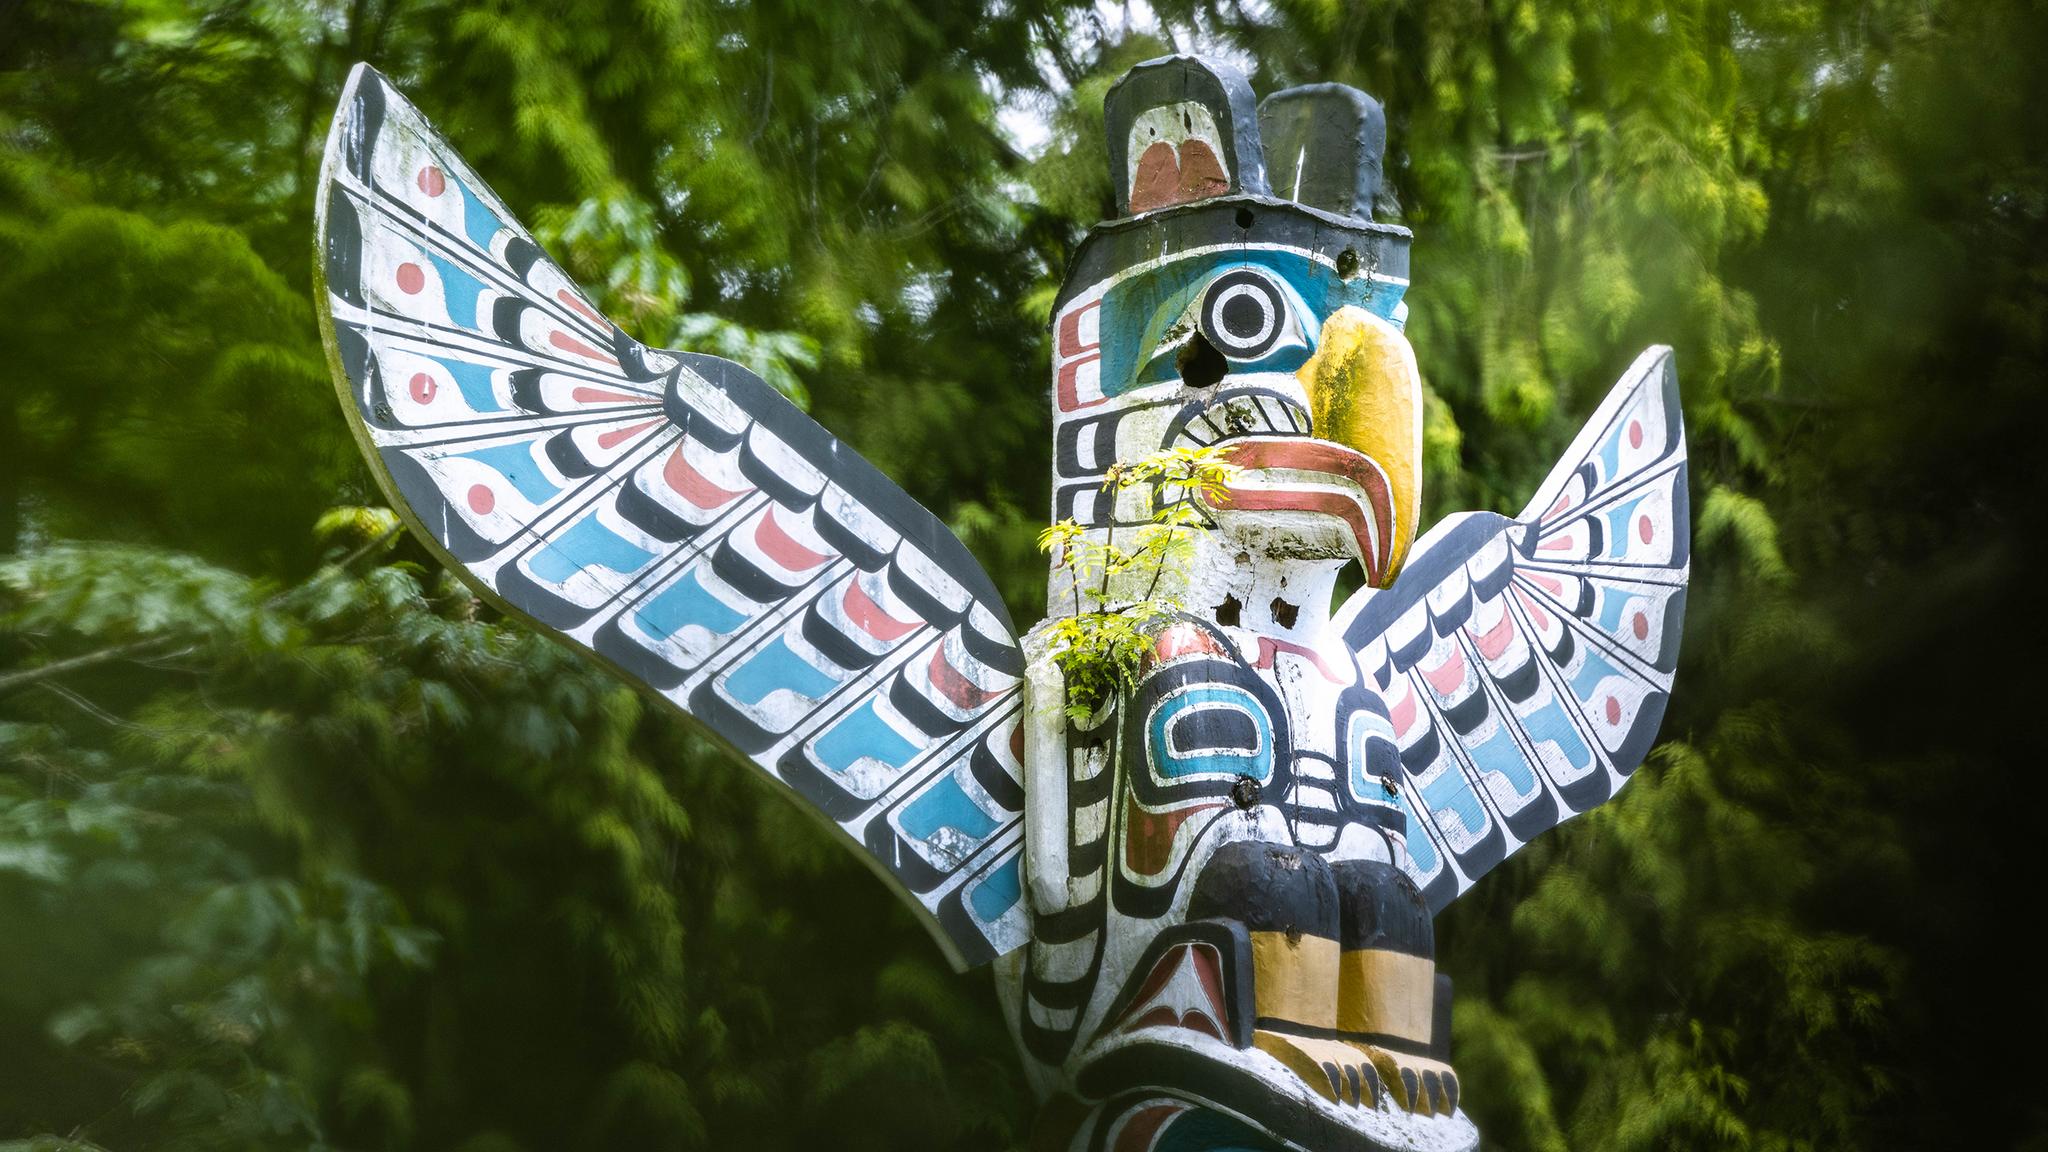 Totem in Vancouver. ©monEpic.at